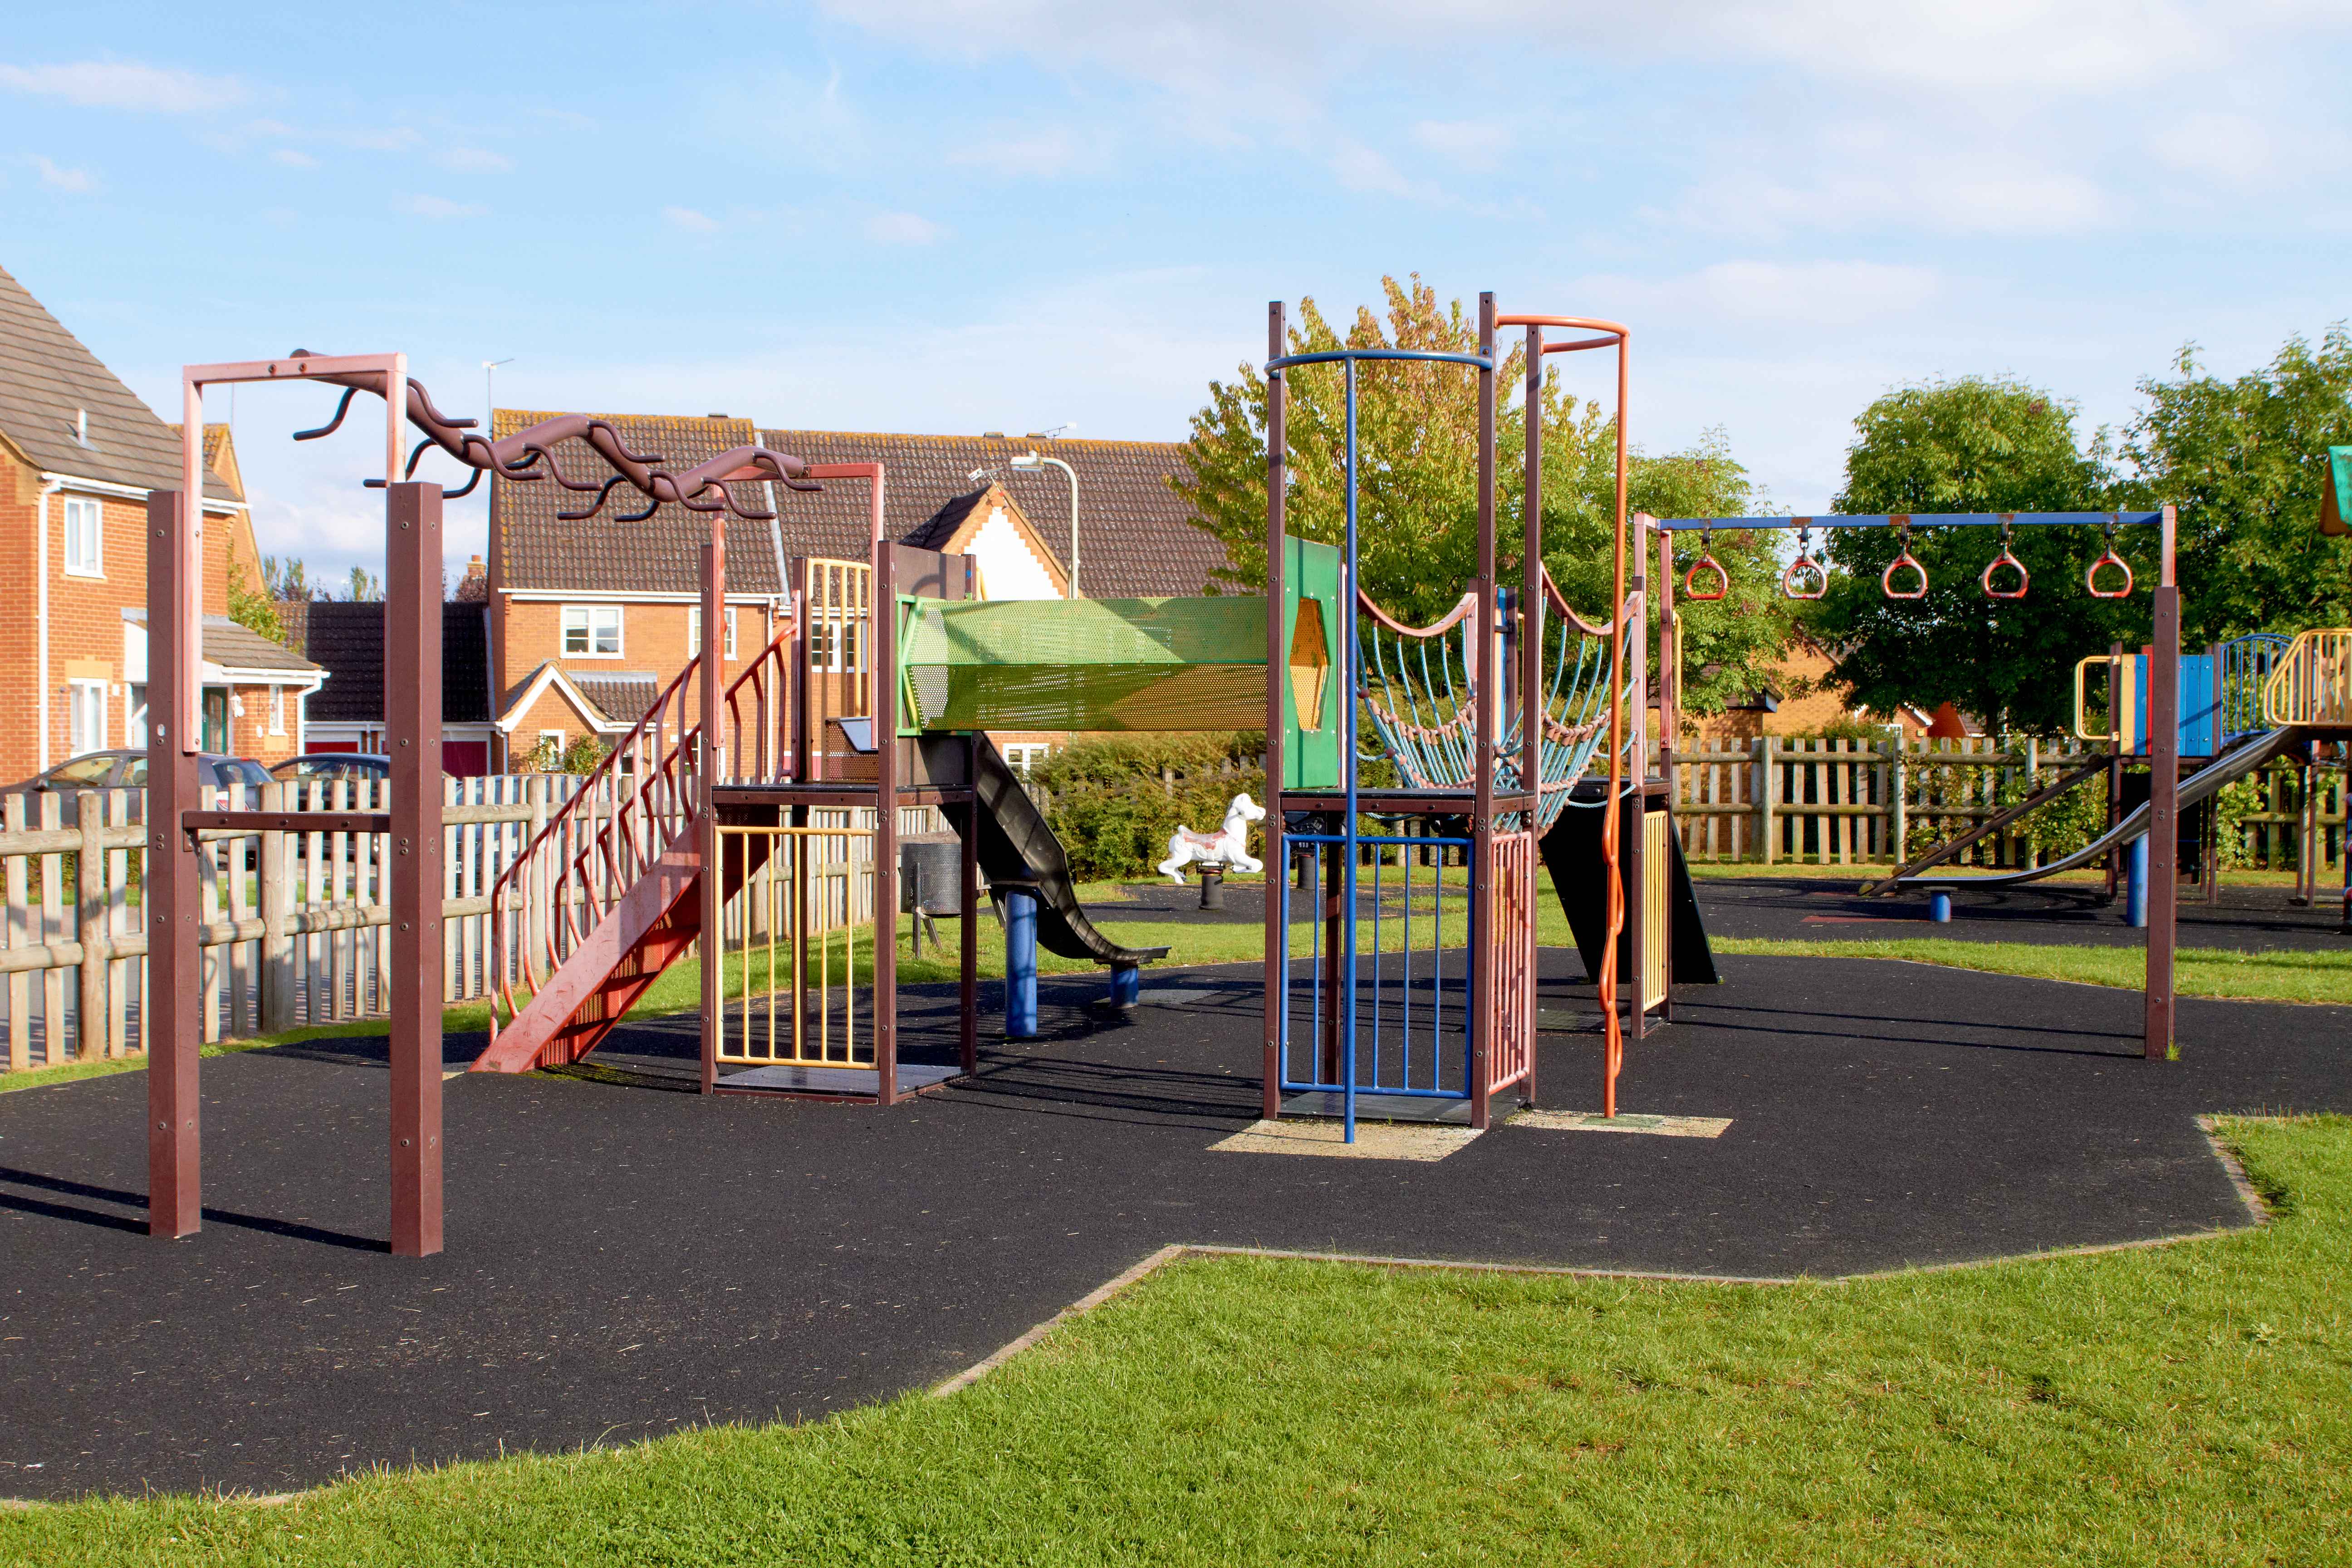 The Lawns play area